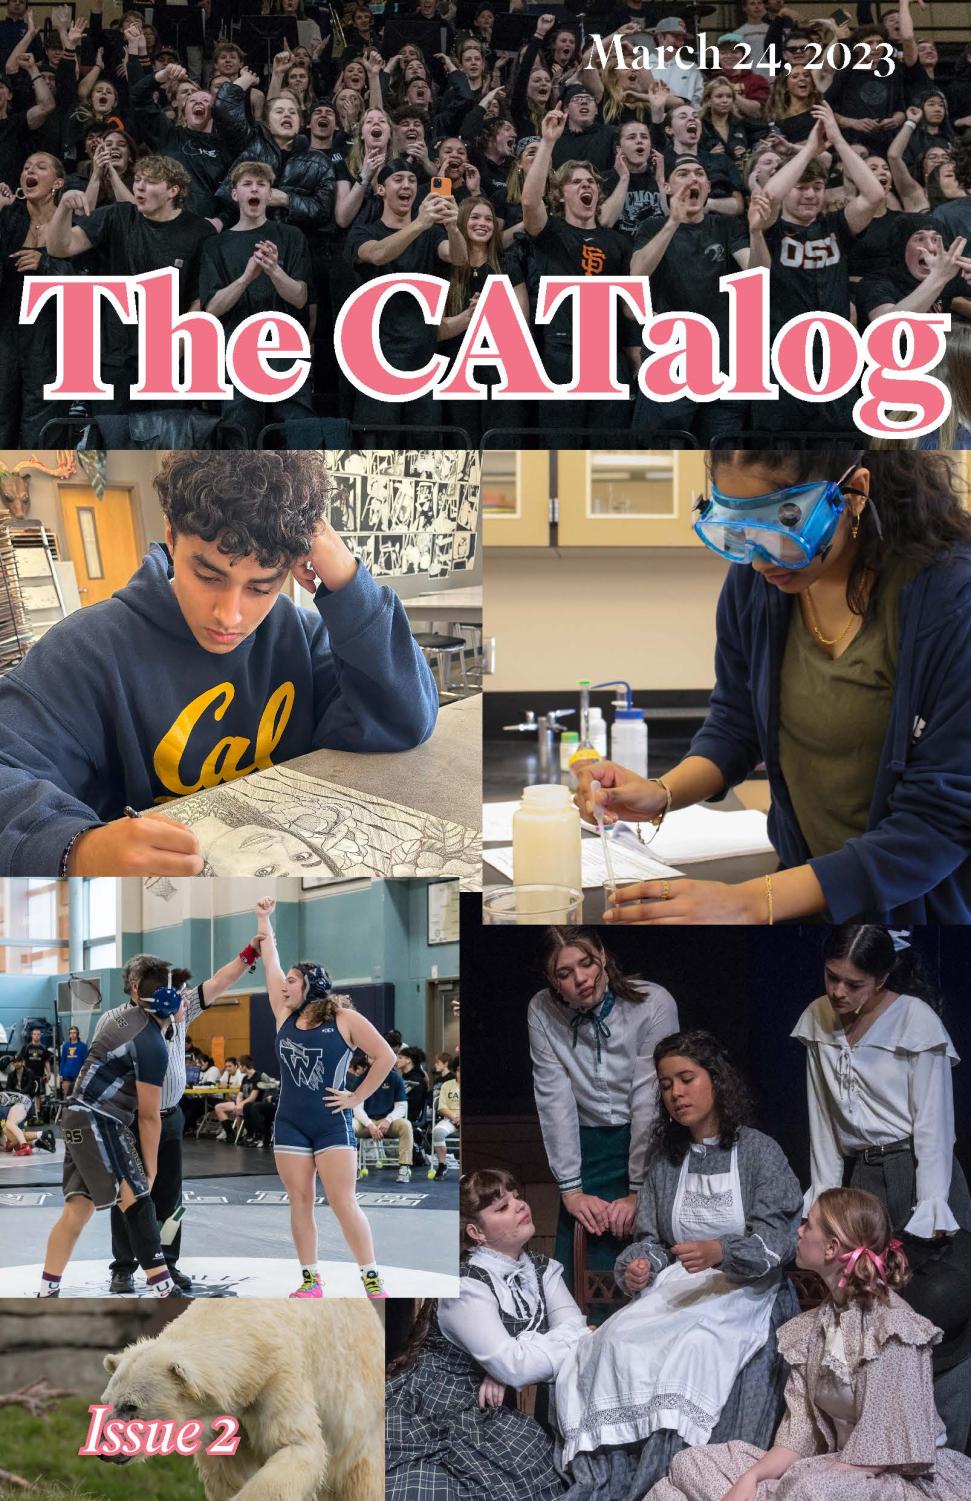 The CATalog Issue 2